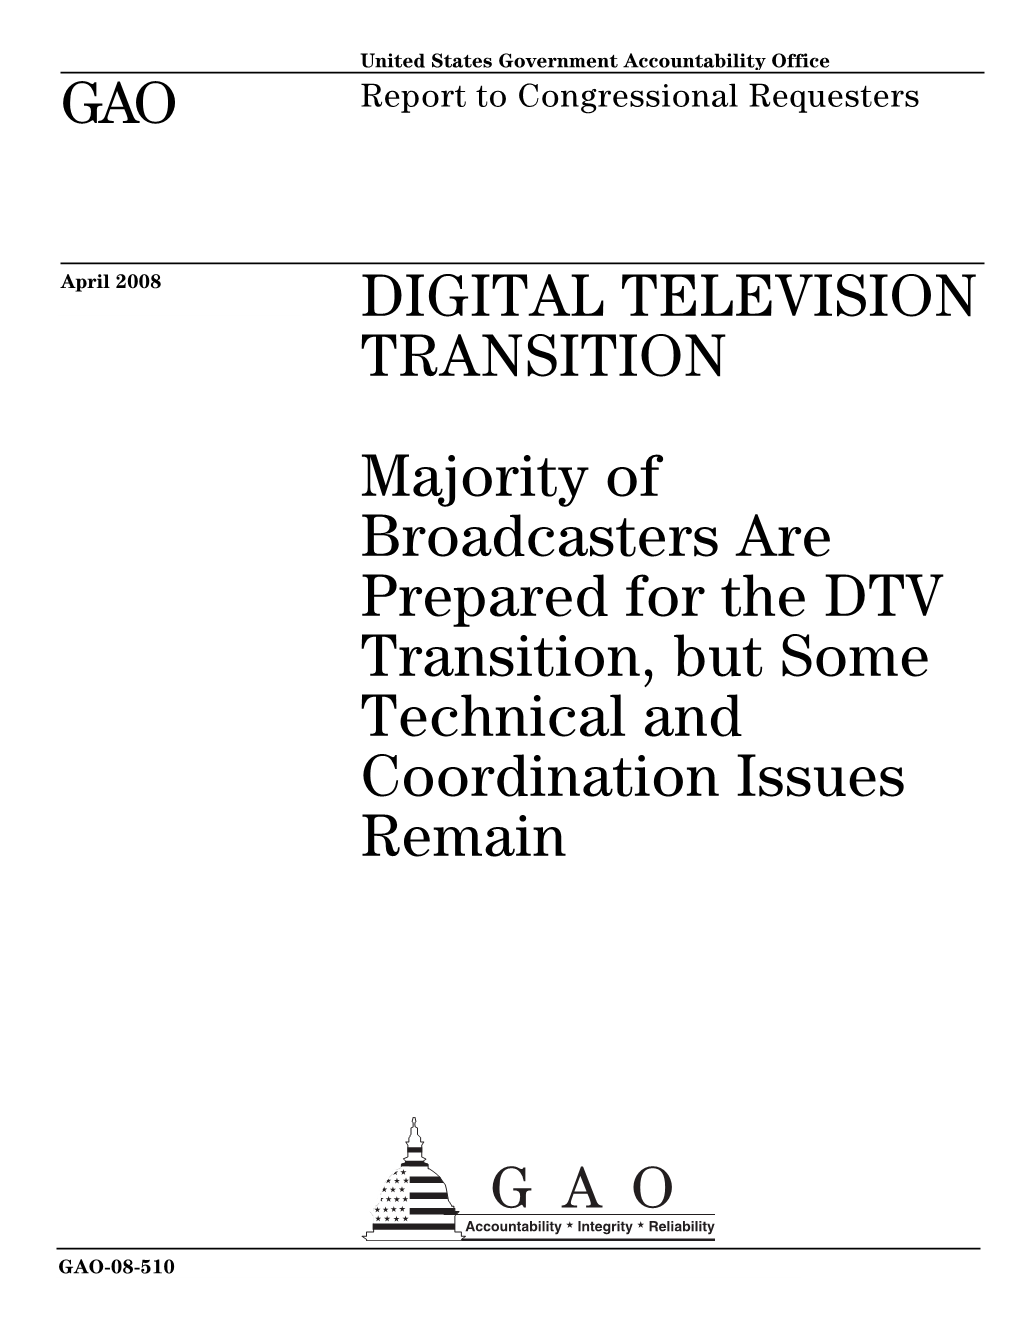 GAO-08-510 Digital Television Transition: Majority of Broadcasters